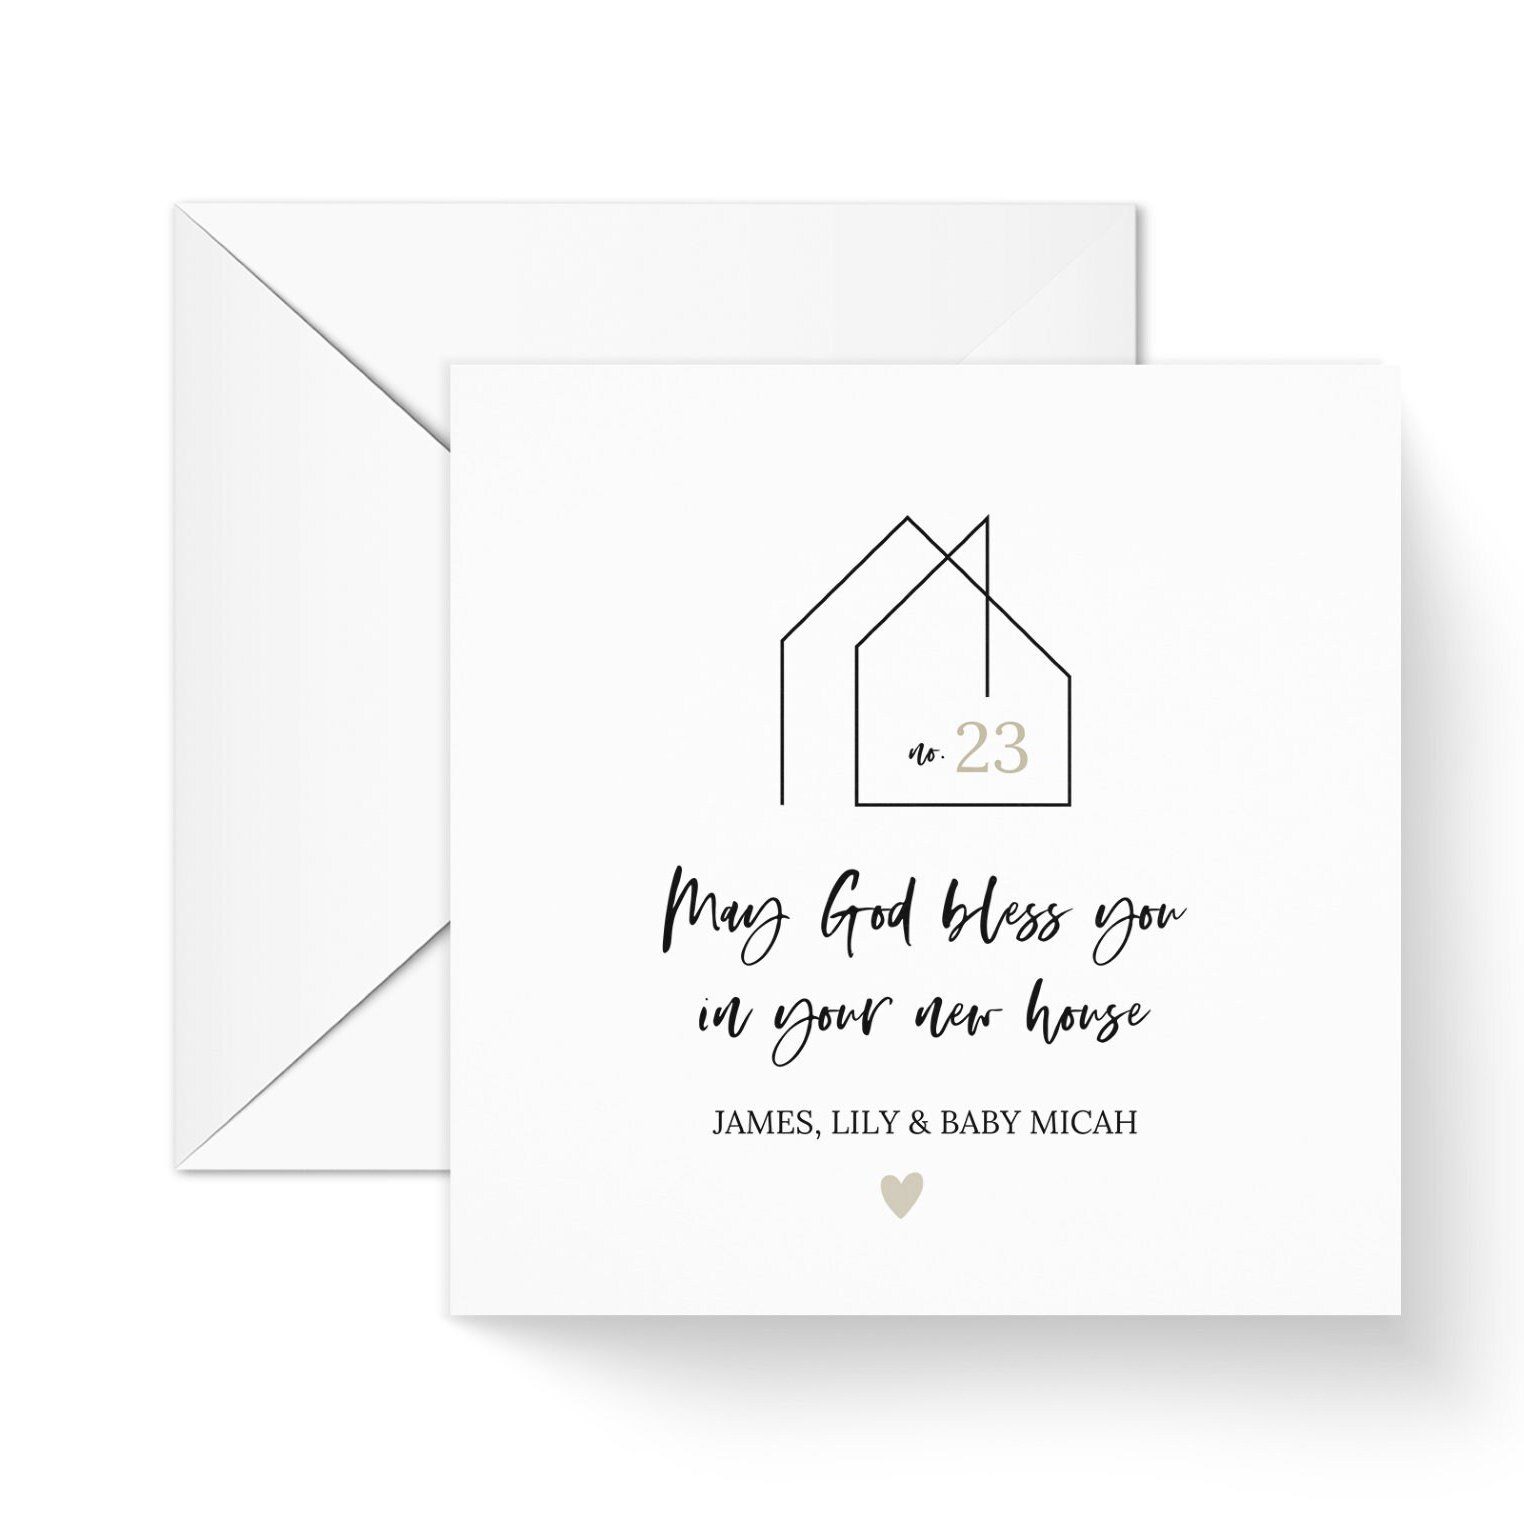 Personalised New Home Scripture Card